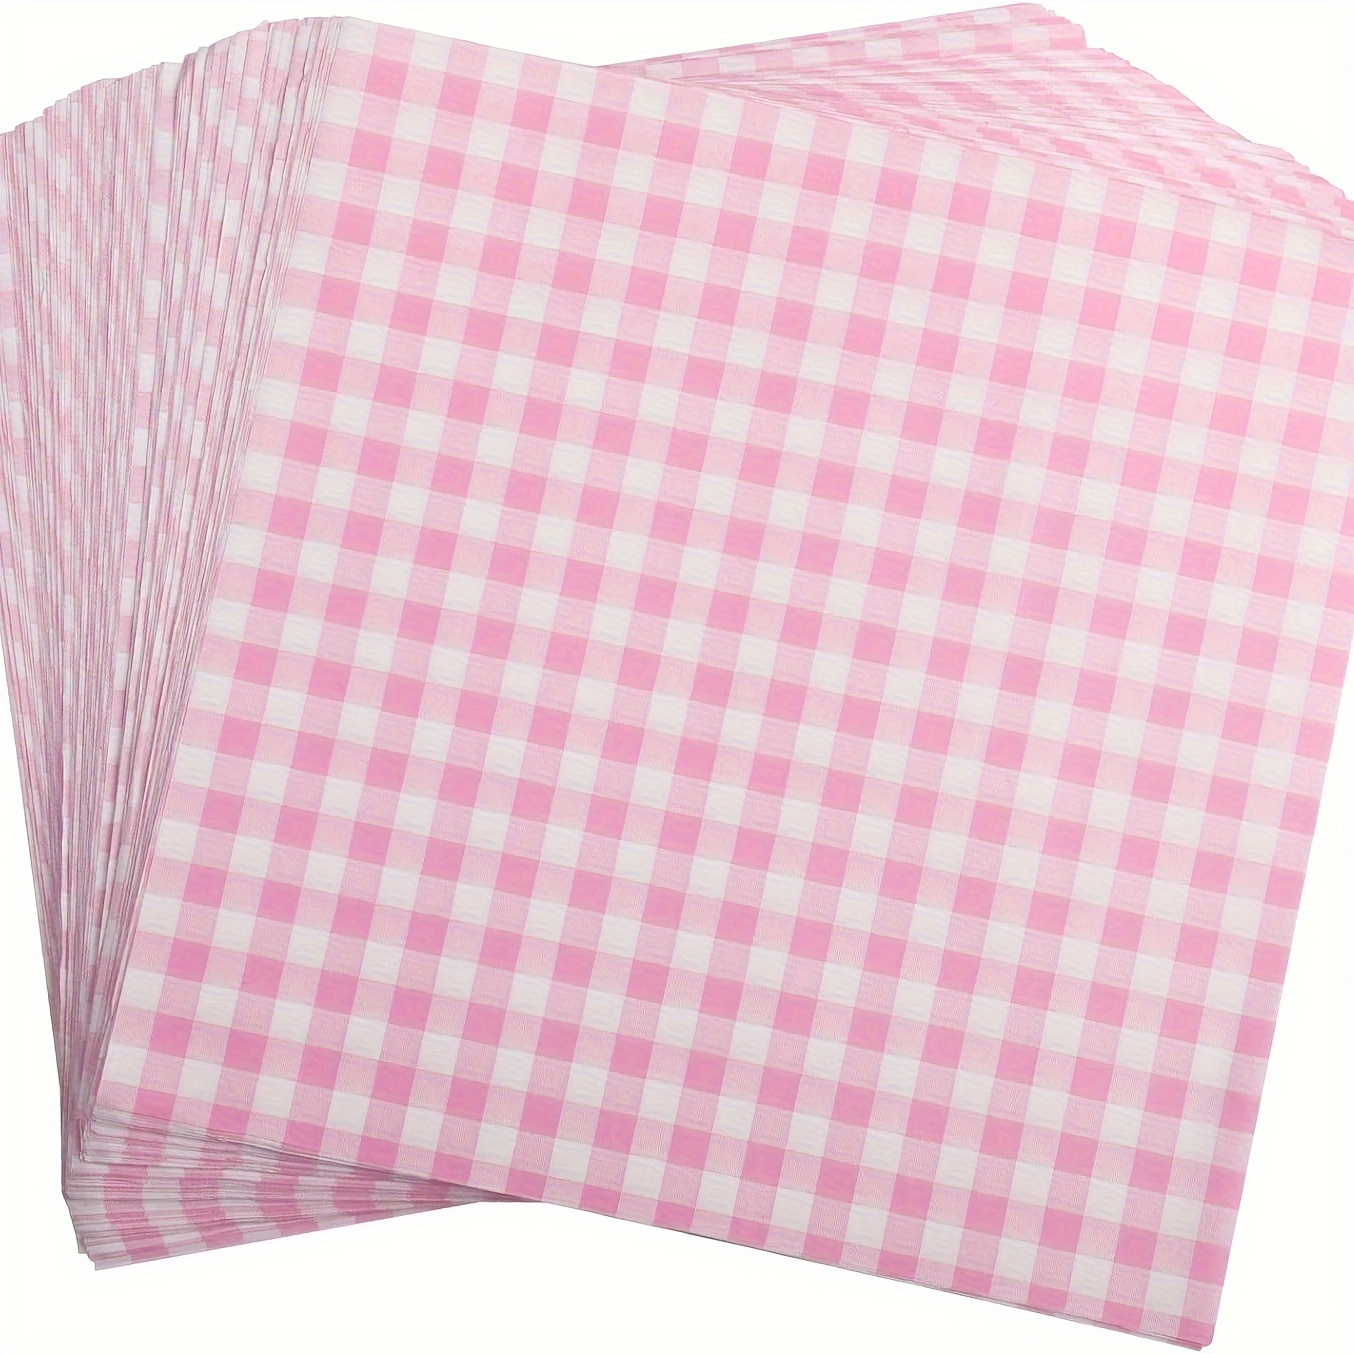 

Waxed Paper For Sandwiches, Burgers, Checkered Packaging Wax Paper Pink Food Basket Liner Coated Greaseproof Paper Hamburger Box Liner Bento Cake Greaseproof Paper Sandwich Wrapping Paper